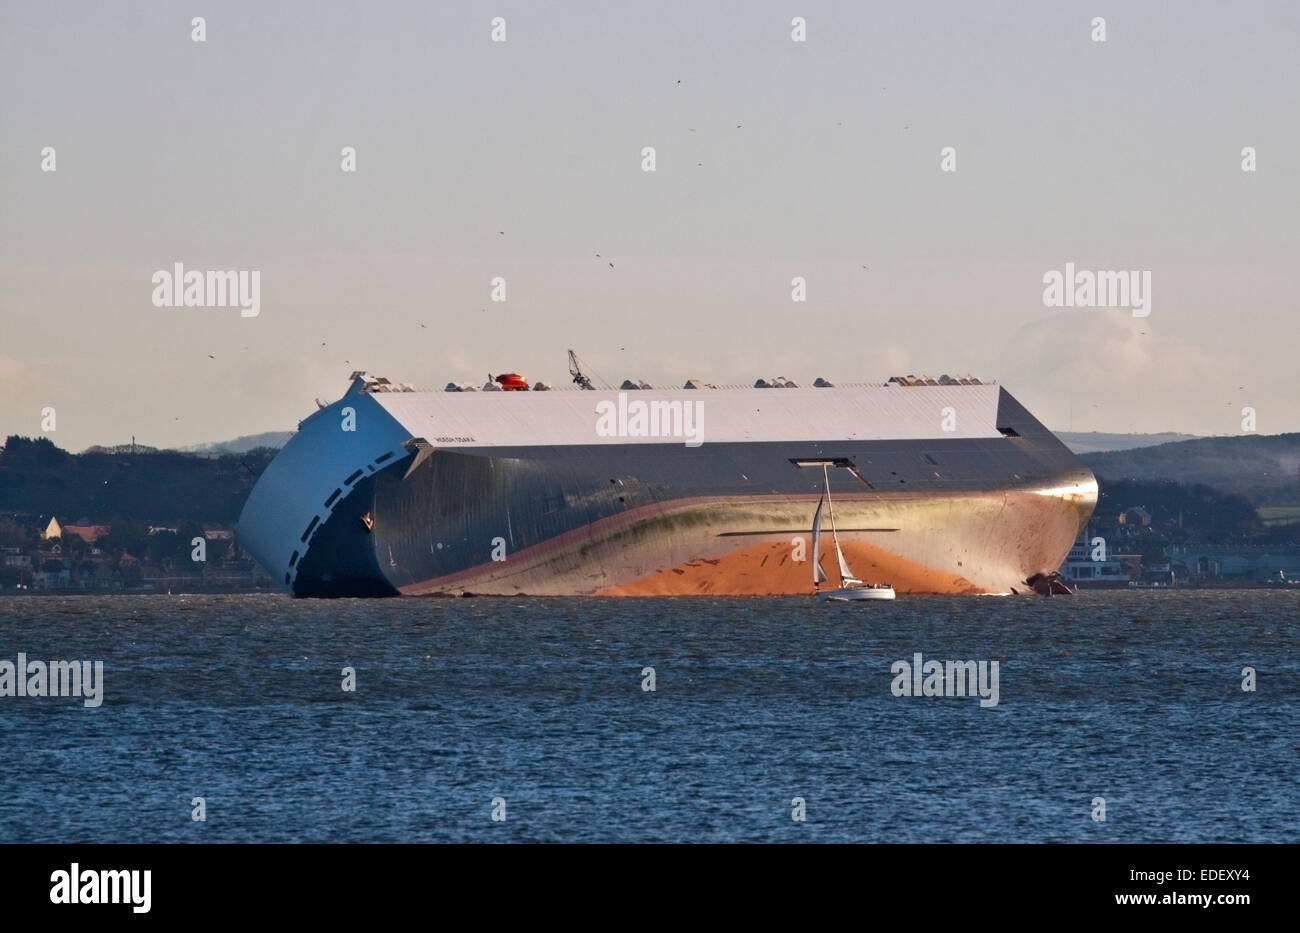 Solent, Hampshire, UK. 6th January, 2015. Hoegh Osaka Car Transporter Ship run aground on the Brambles Sandbank in the Solent, Hampshire, England - awaiting salvage plans - 06Jan15 Credit:  Krys Bailey/Alamy Live News Stock Photo